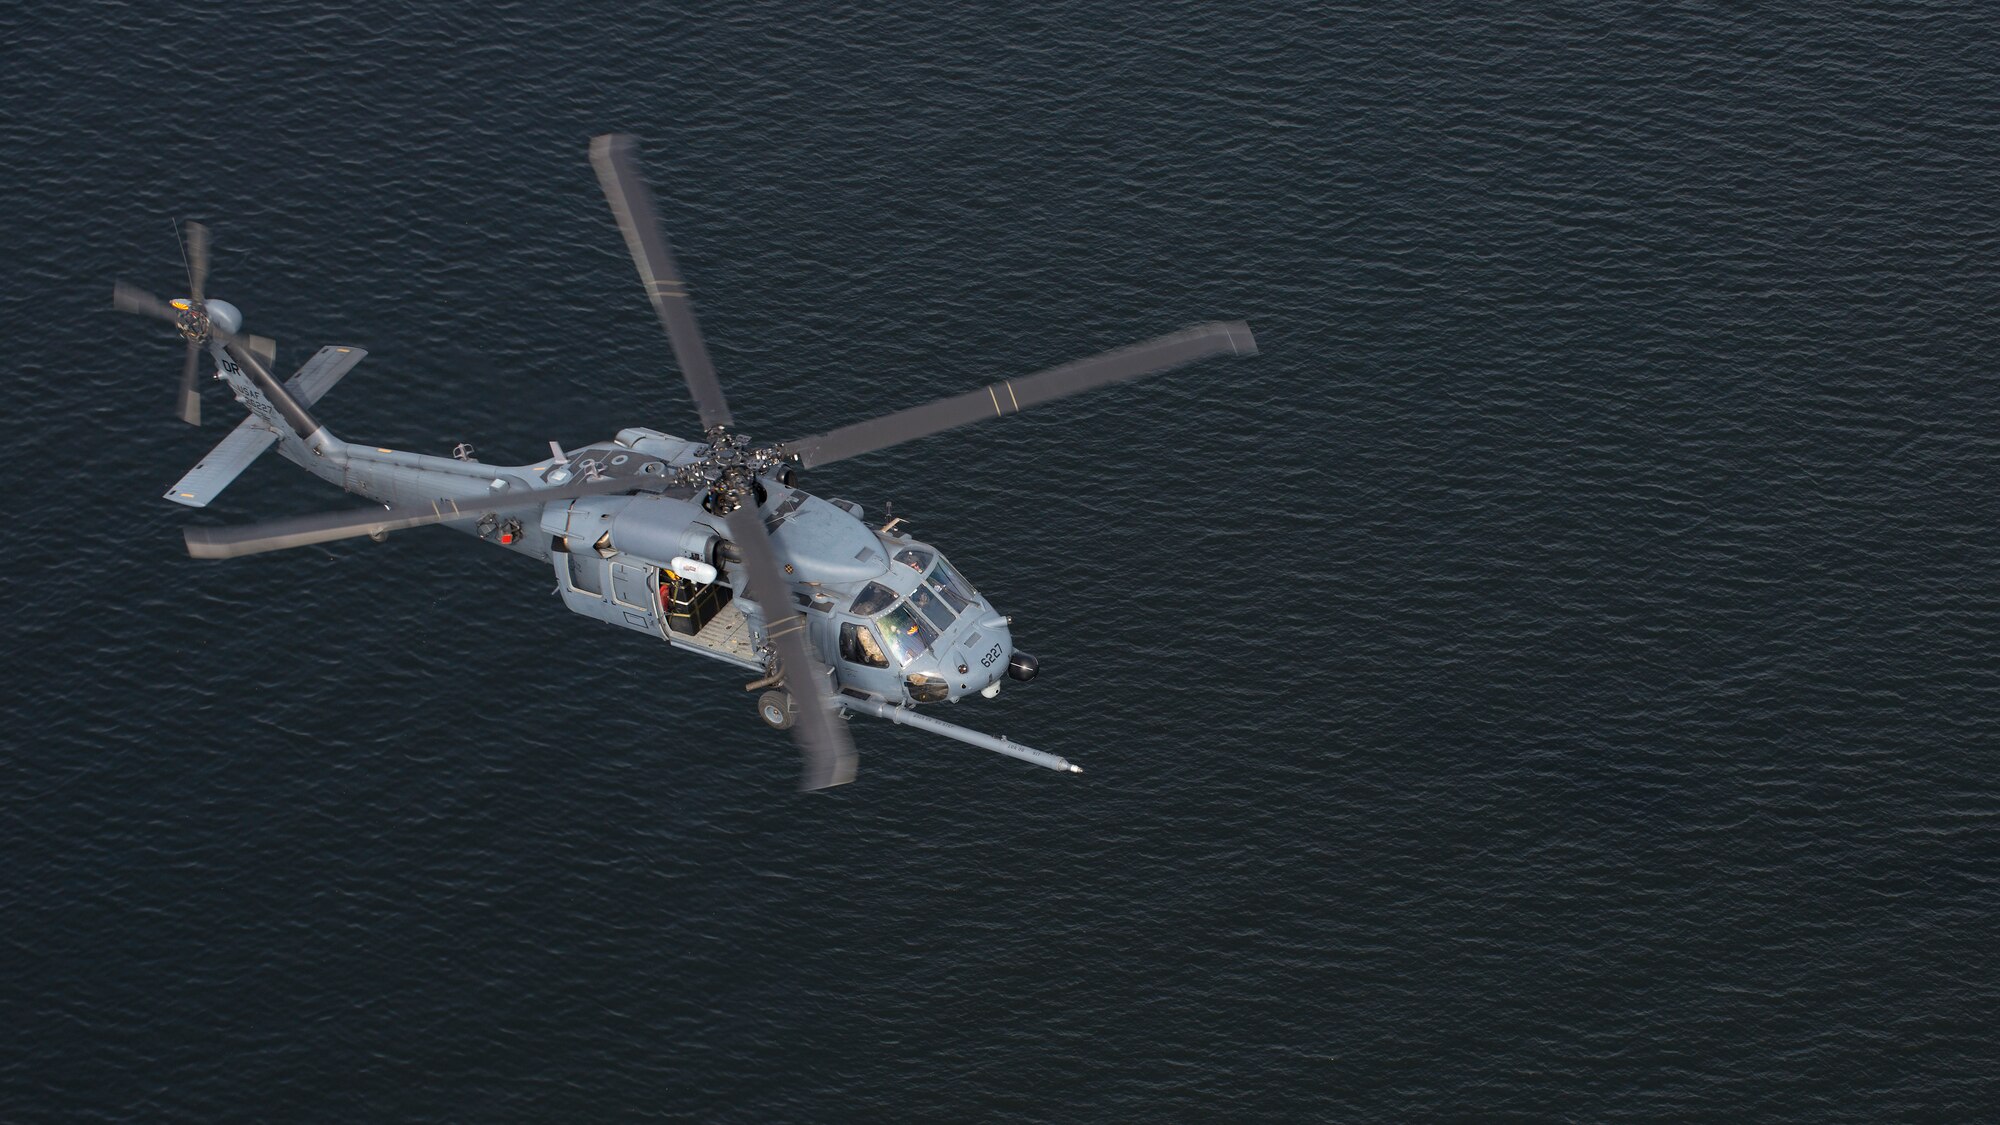 An HH-60 Pave Hawk helicopter assigned to the 305th Rescue Squadron (RQS), Davis-Monthan Air Force Base, Ariz., flies above the waters of Tampa Bay, Fla., Nov. 8, 2019.